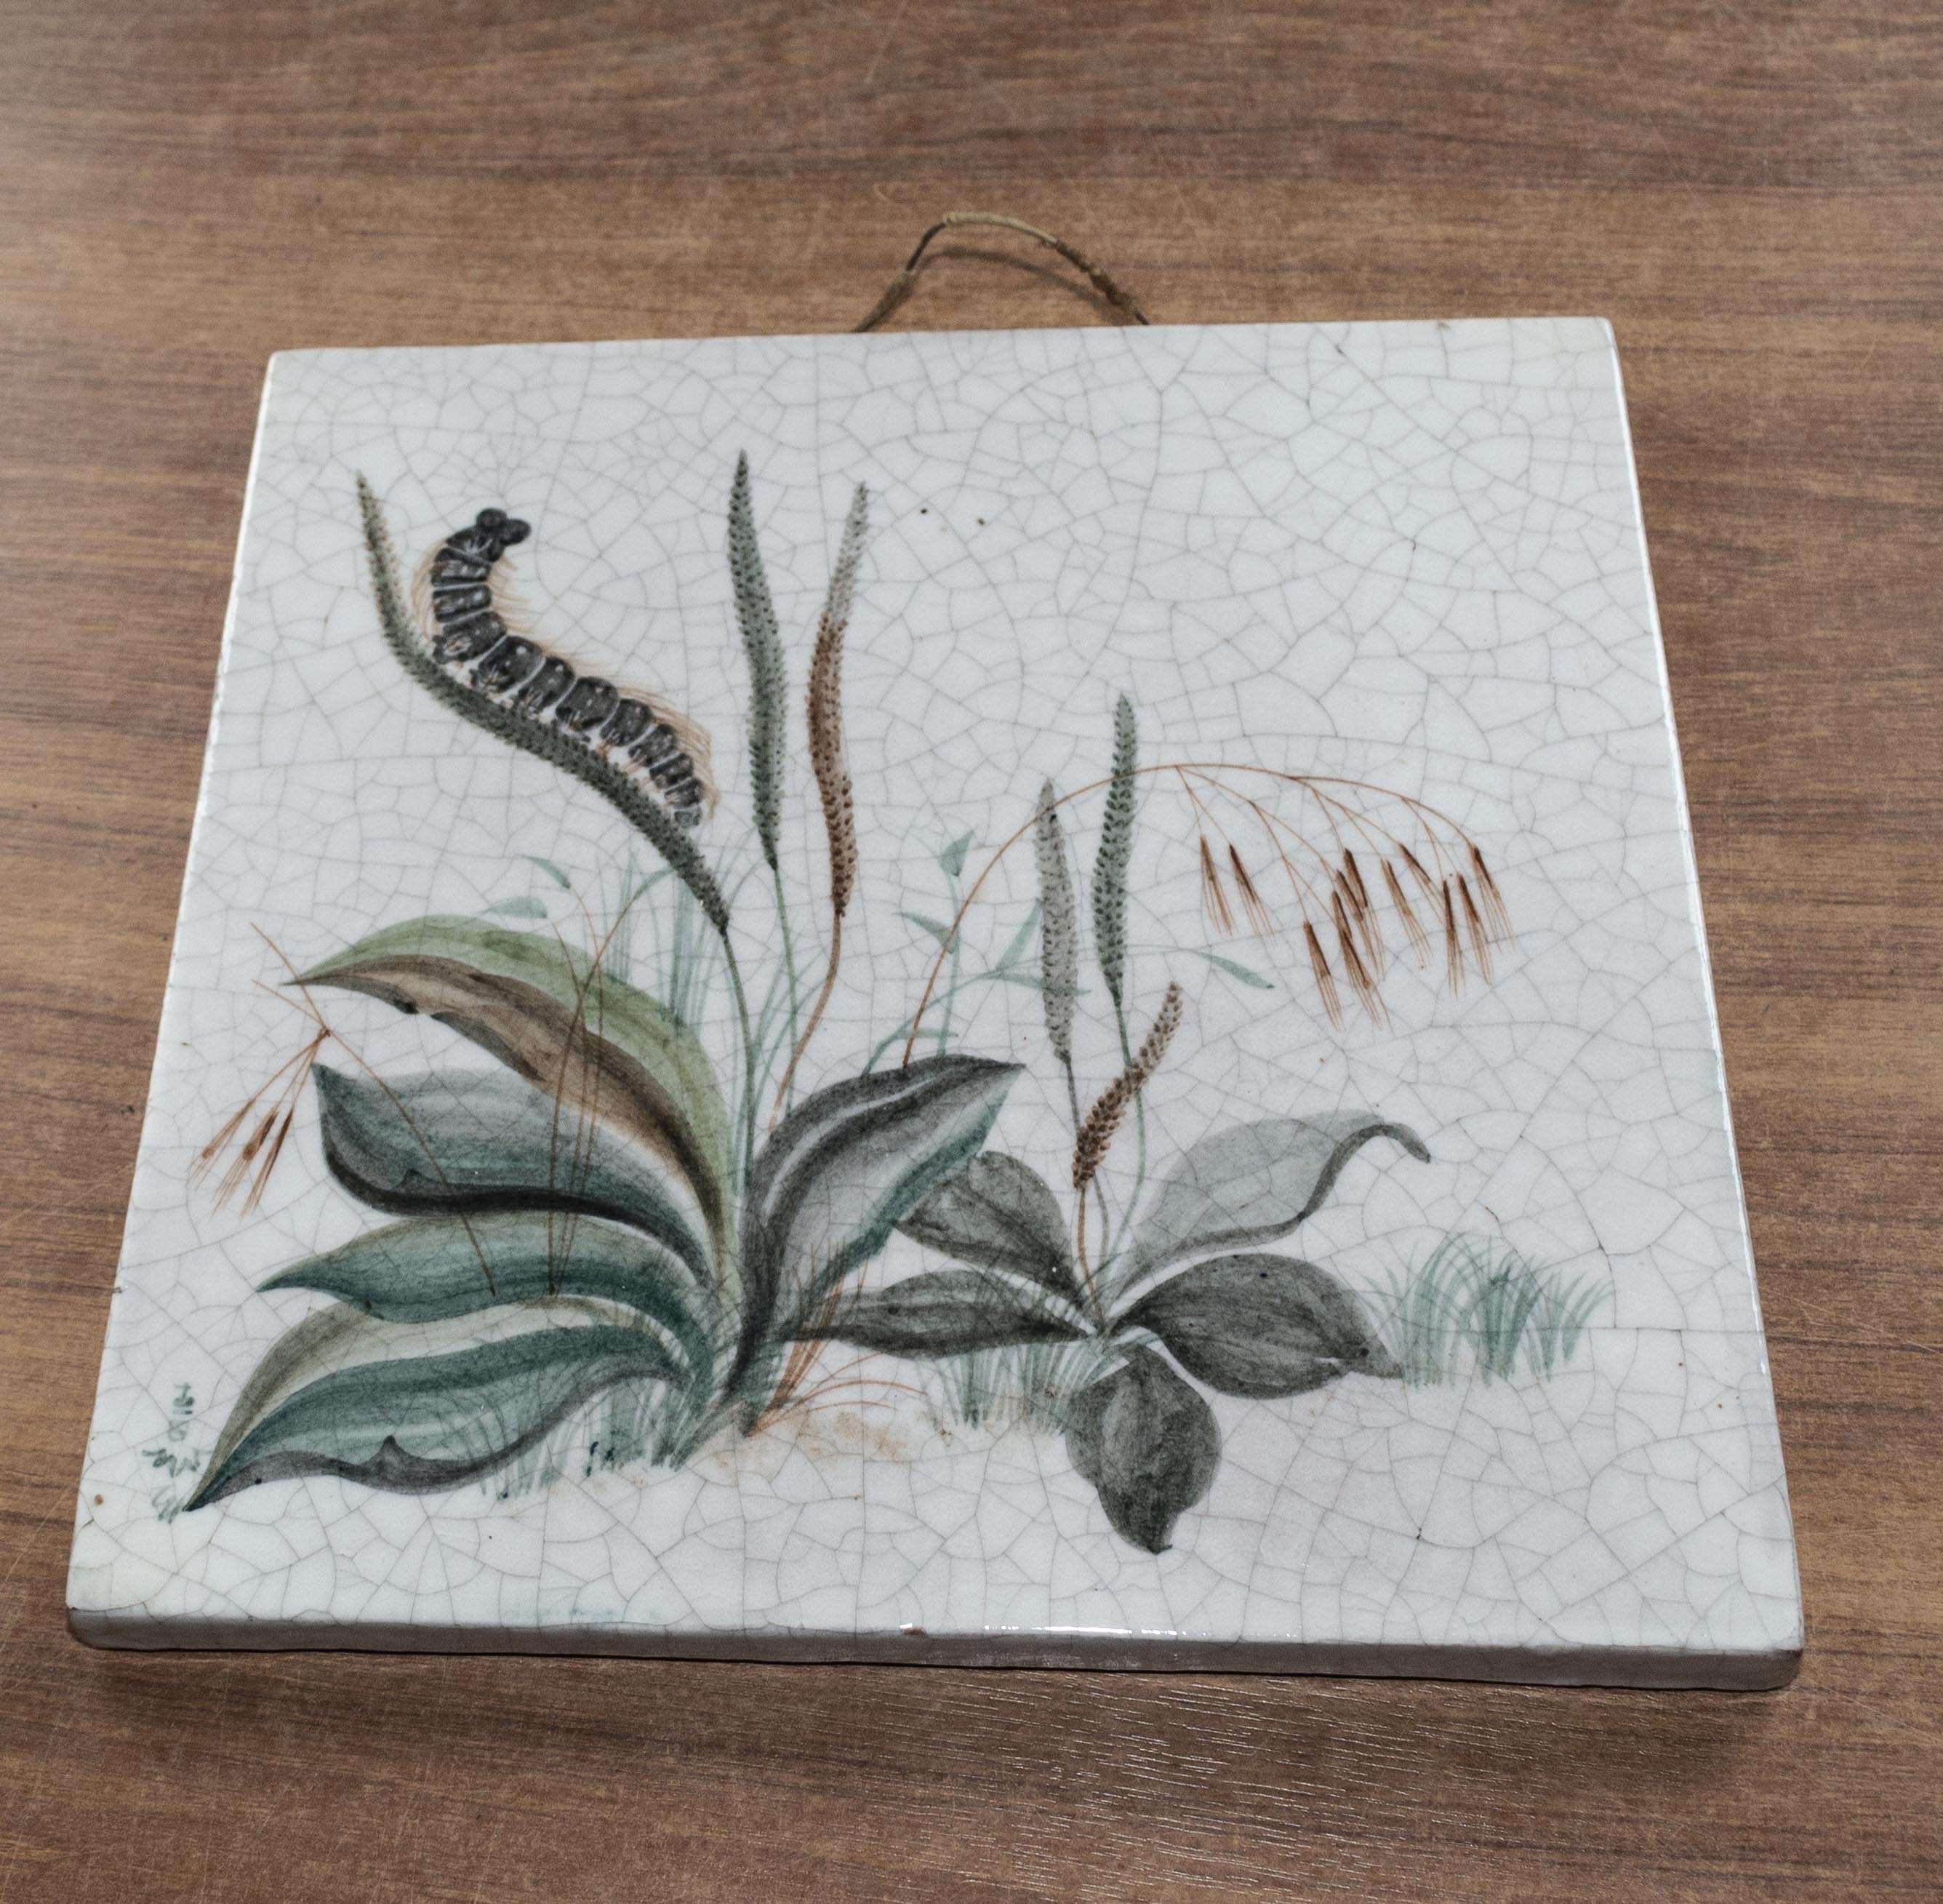 A painted tile